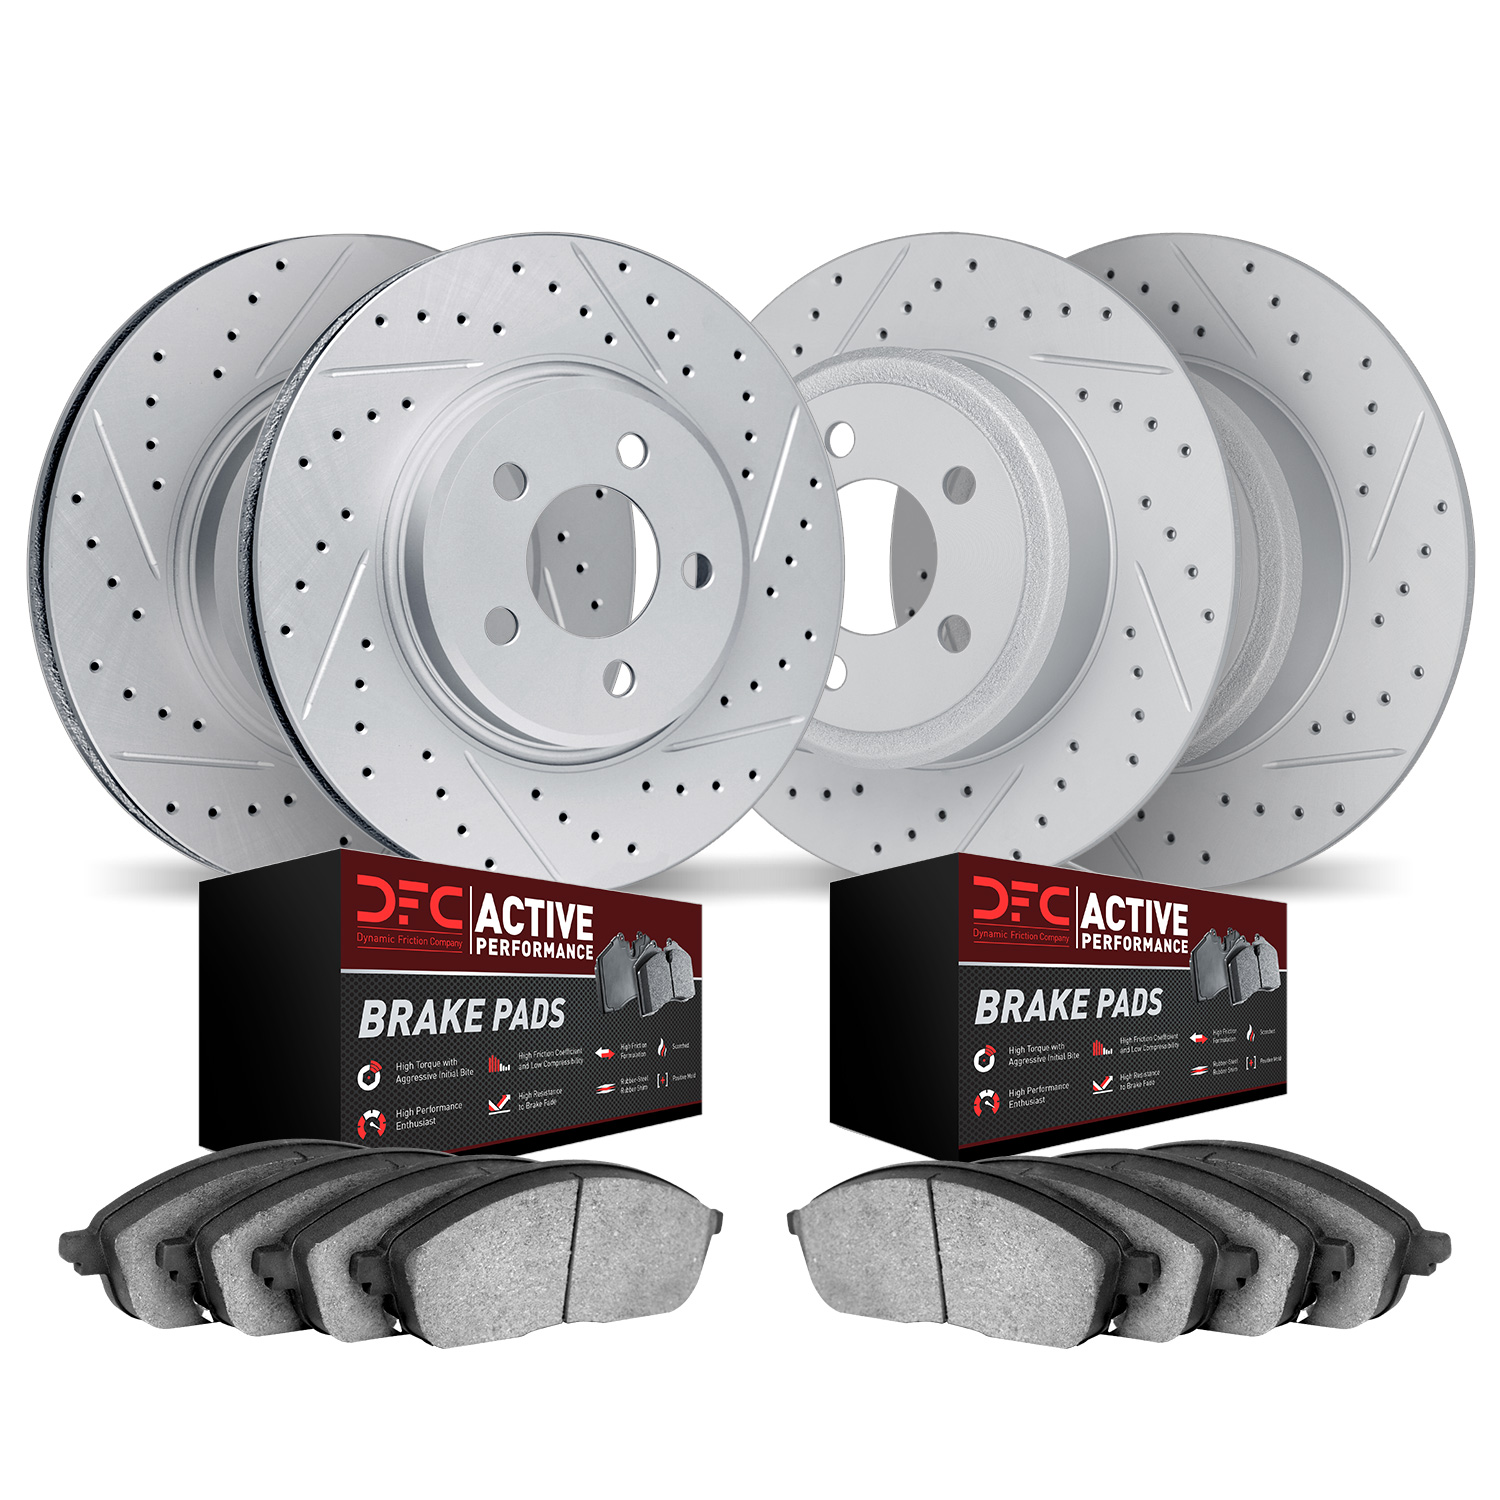 2704-13008 Geoperformance Drilled/Slotted Brake Rotors with Active Performance Pads Kit, 2003-2003 Subaru, Position: Front and R